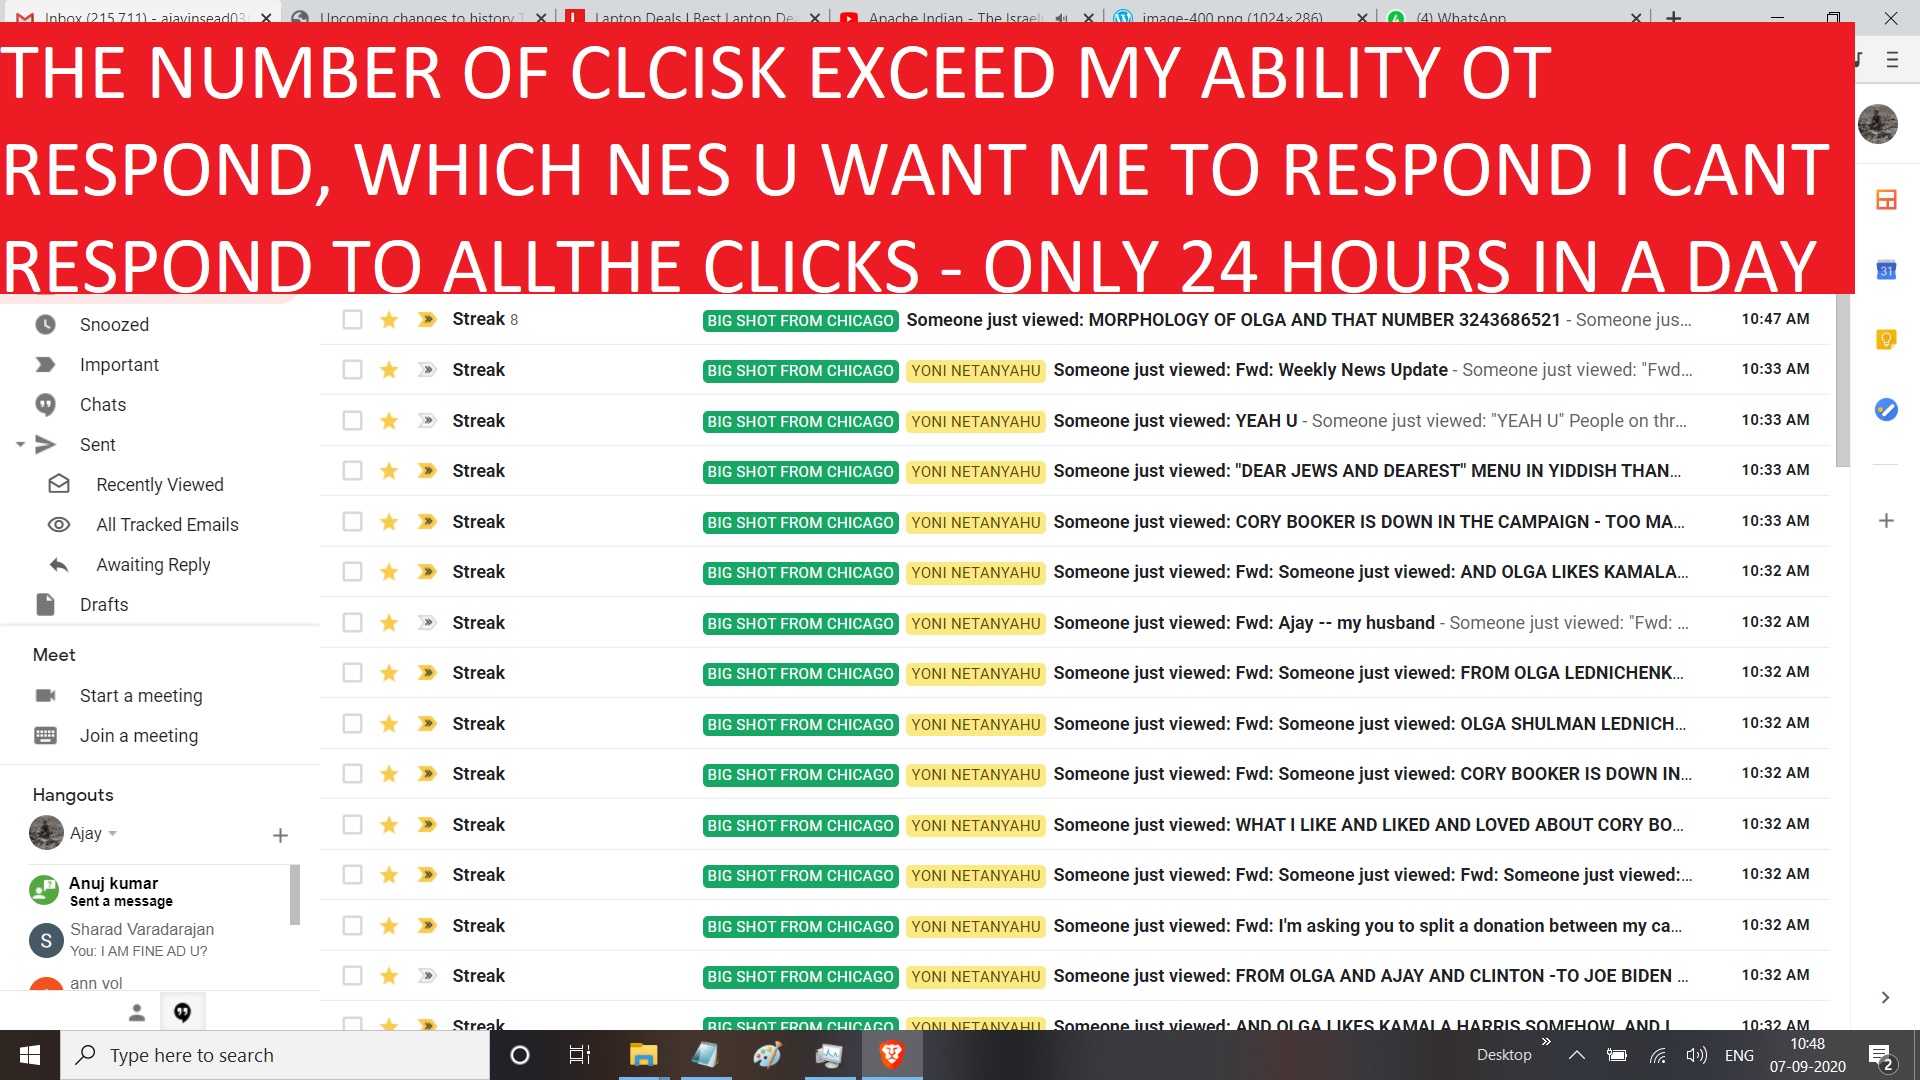 THE NUMBER OF CLCISK EXCEED MY ABILITY OT RESPOND, WHICH NES U WANT ME TO RESPOND I CANT RESPOND TO ALLTHE CLICKS - ONLY 24 HOURS IN A DAY